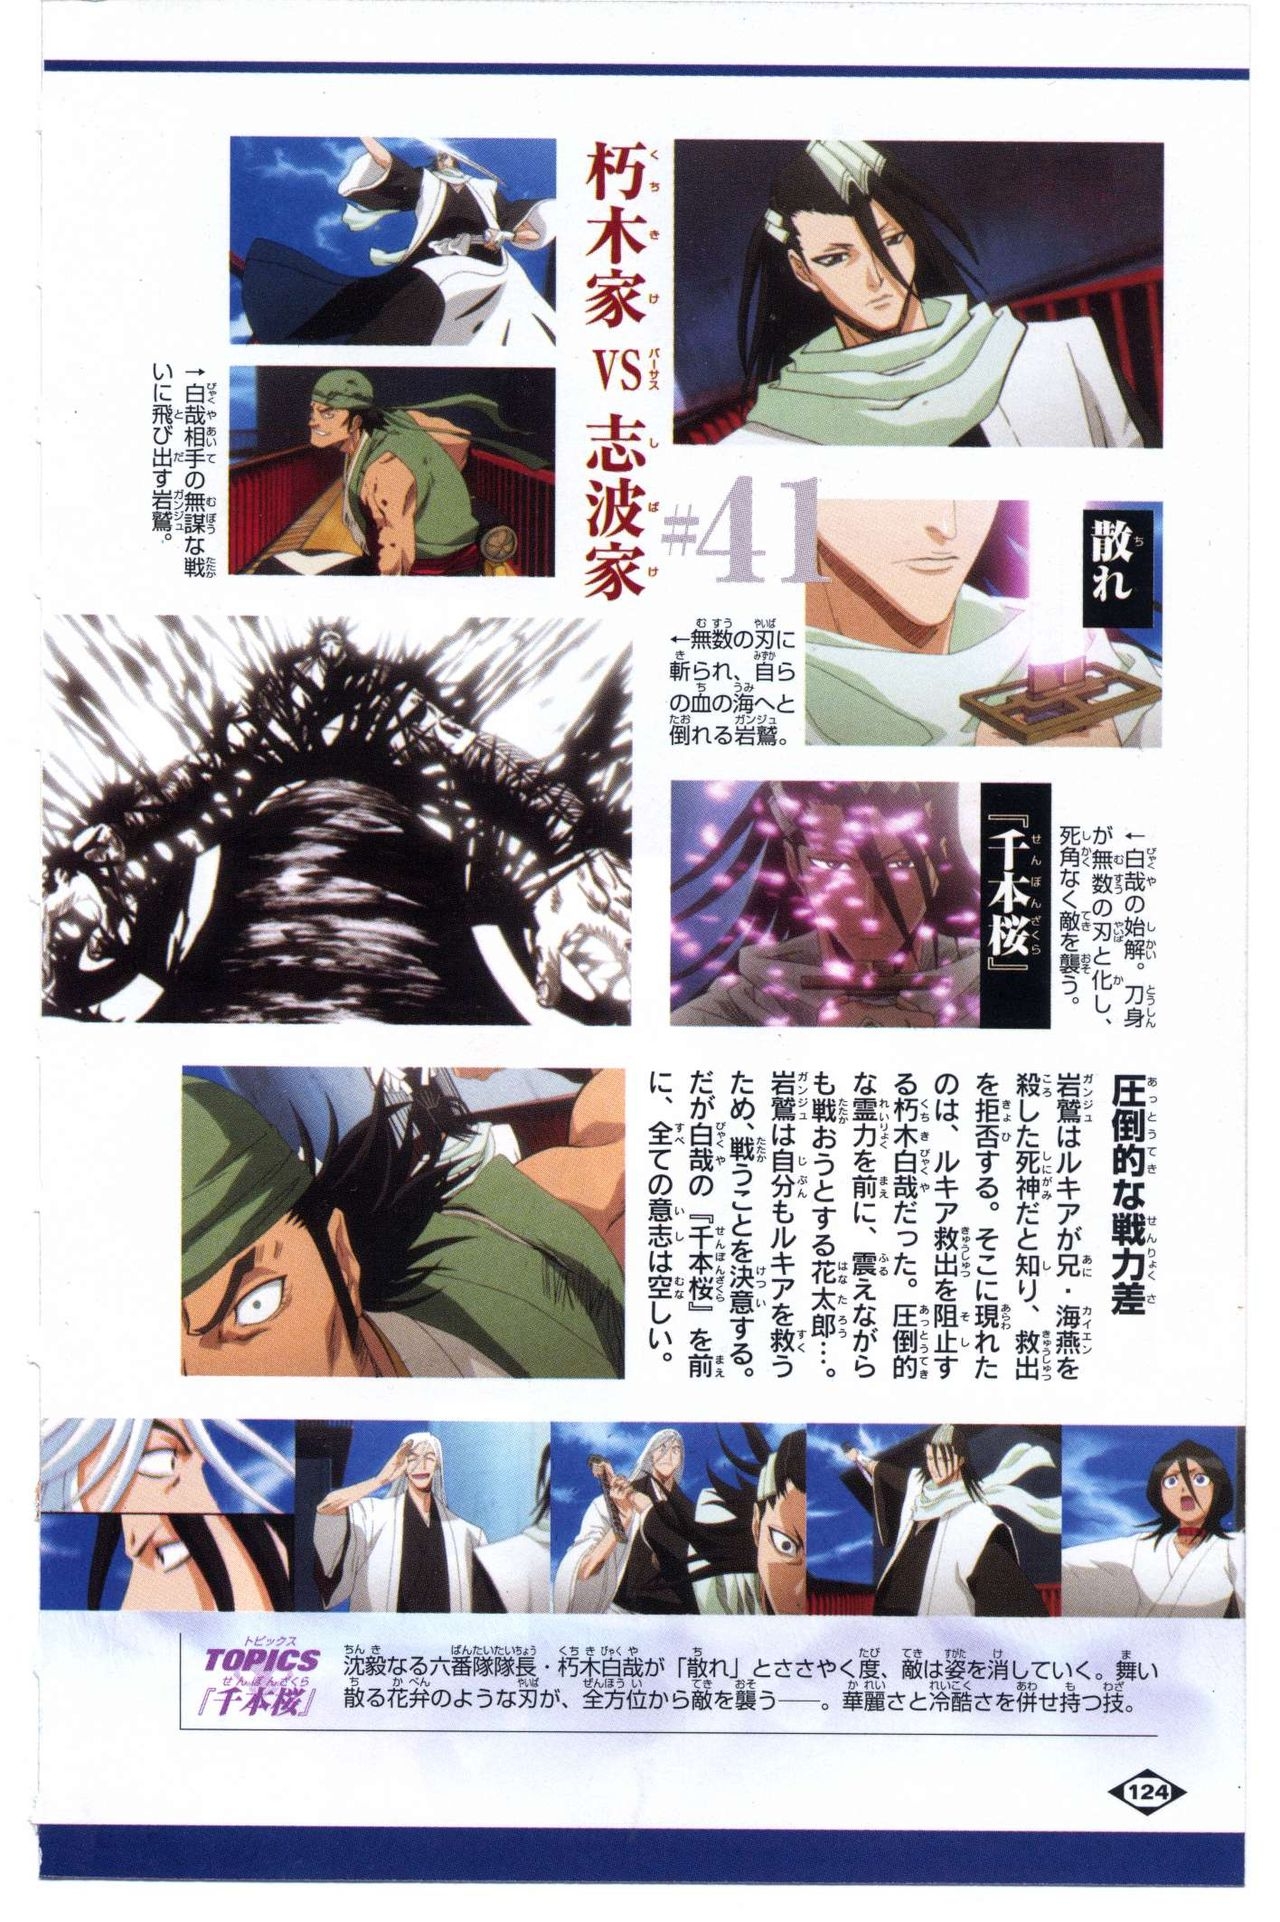 Bleach: Official Animation Book VIBEs 124